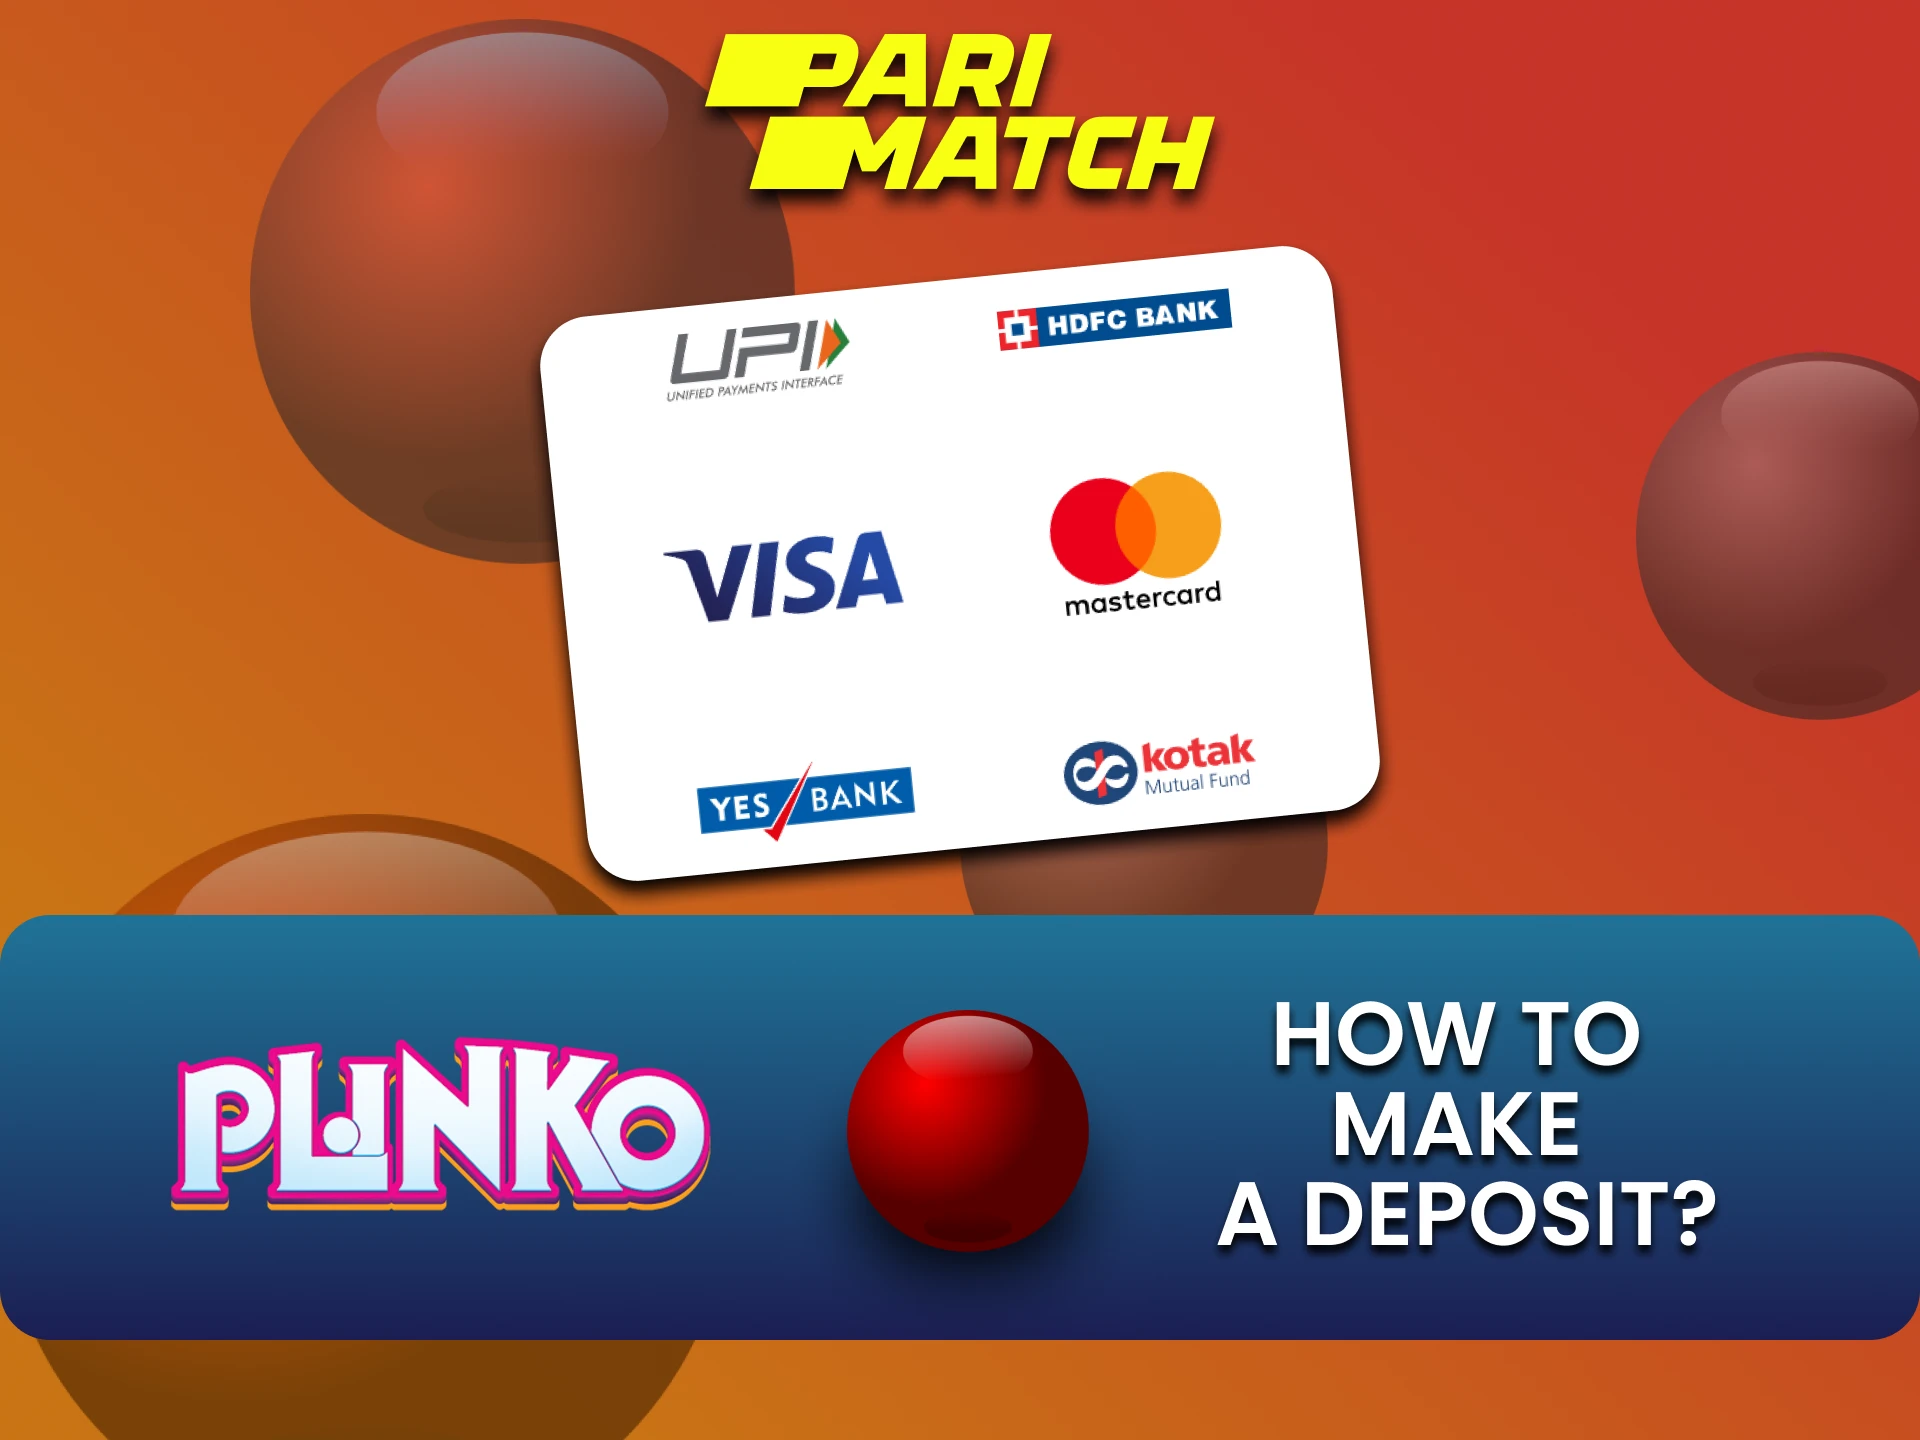 Find out about deposit methods for Plinko from Parimatch.